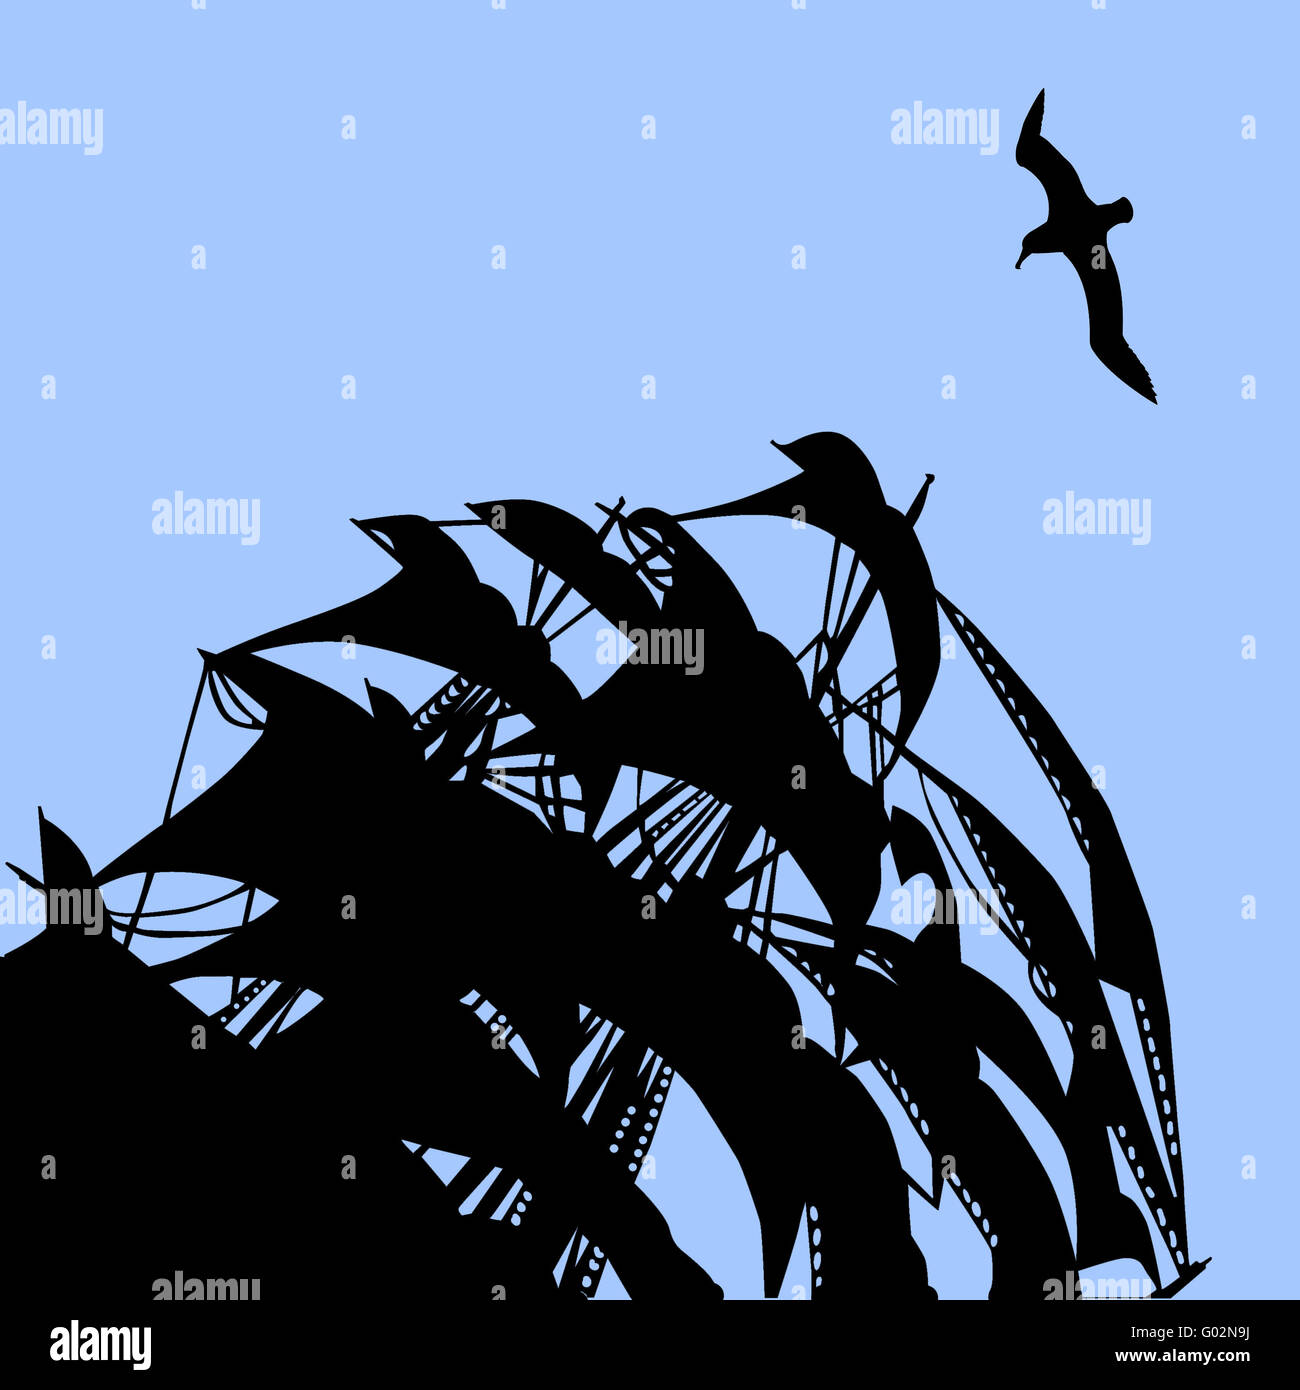 vector illustration of the sail on background blue sky Stock Photo